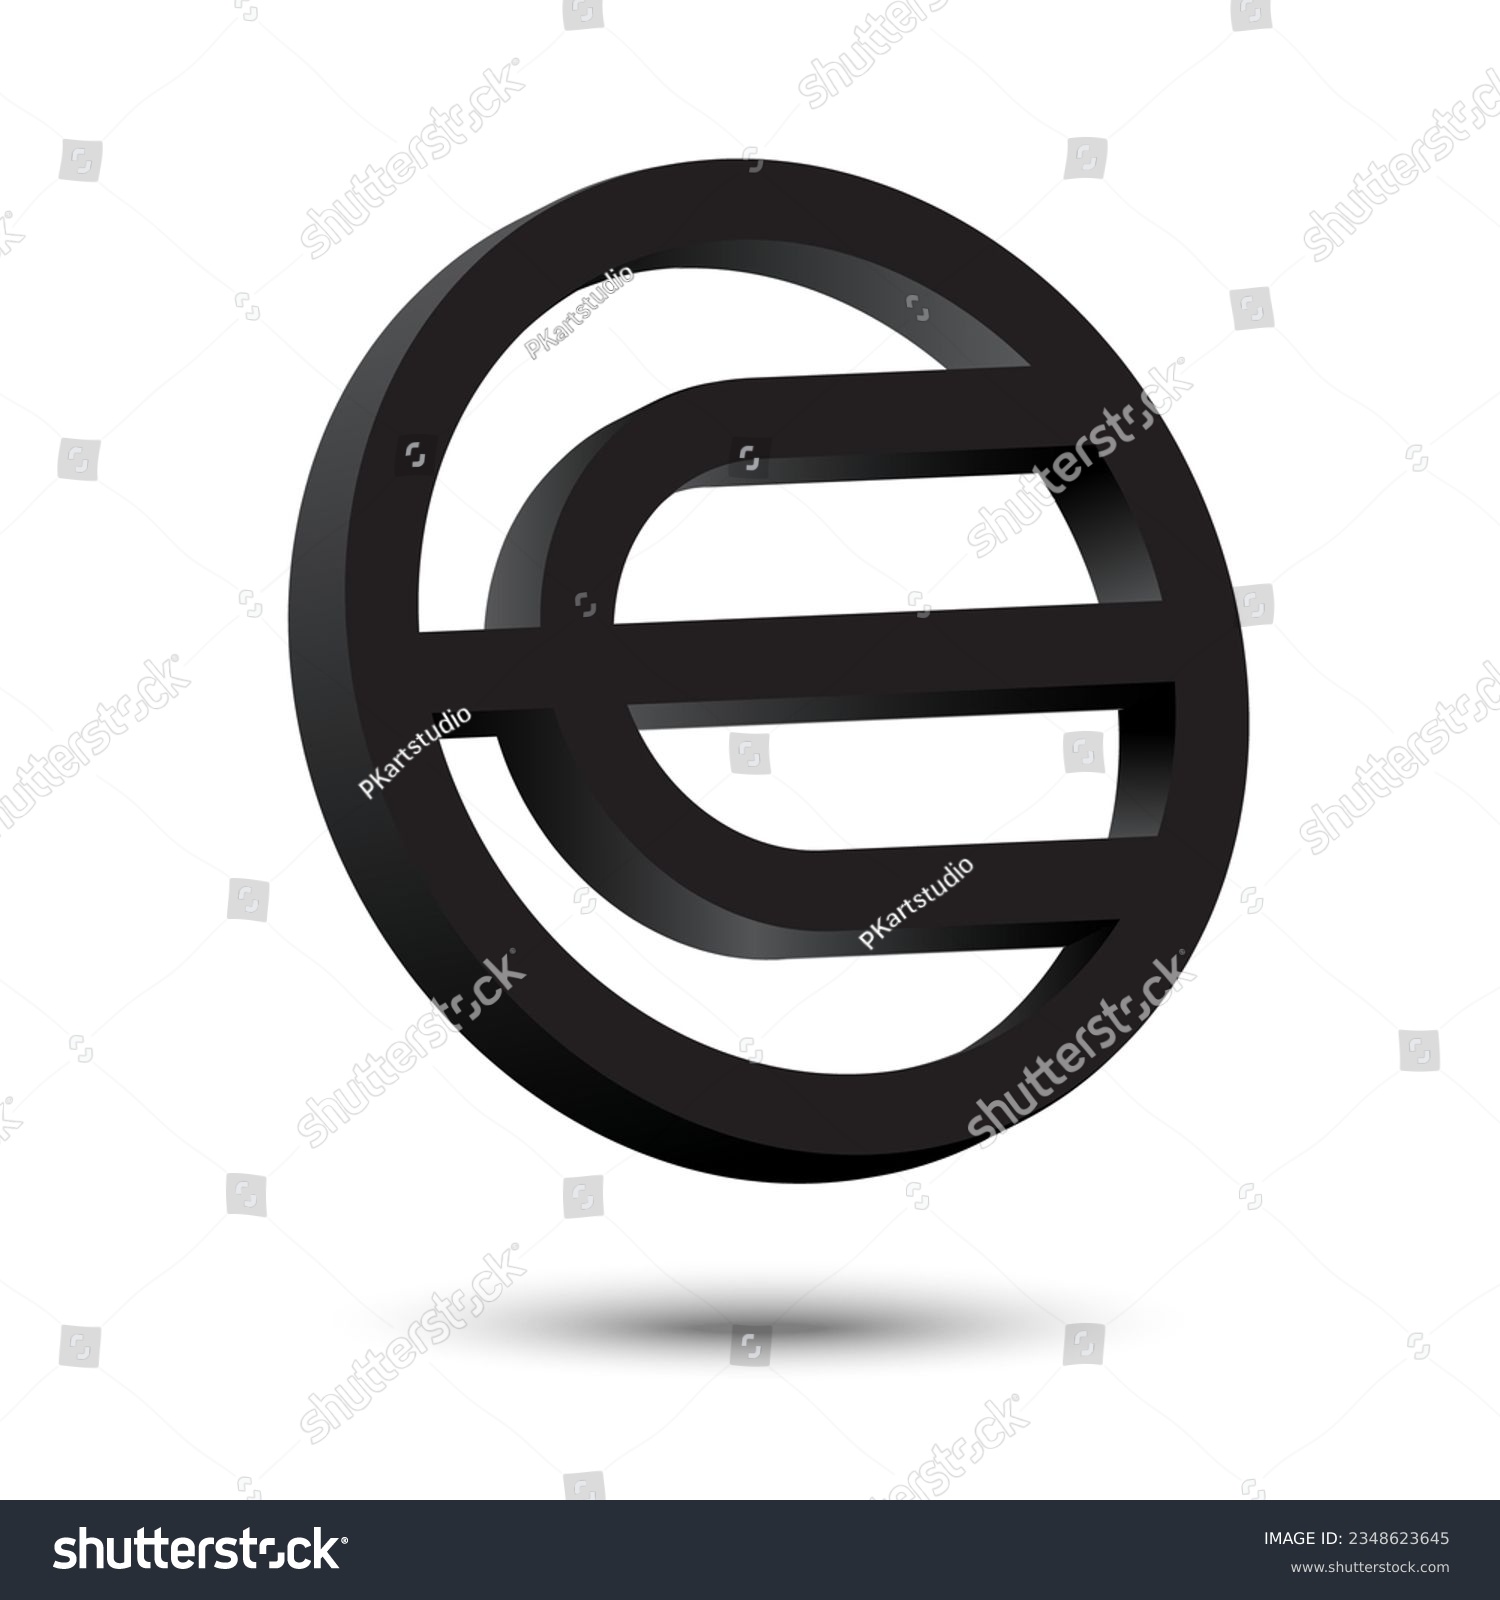 SVG of Worldcoin, WLD crypto currency 3D logo vector illustration design with shadow isolated on white background .Worldcoin Token (WLD) icon banner 3D design concept for website. svg